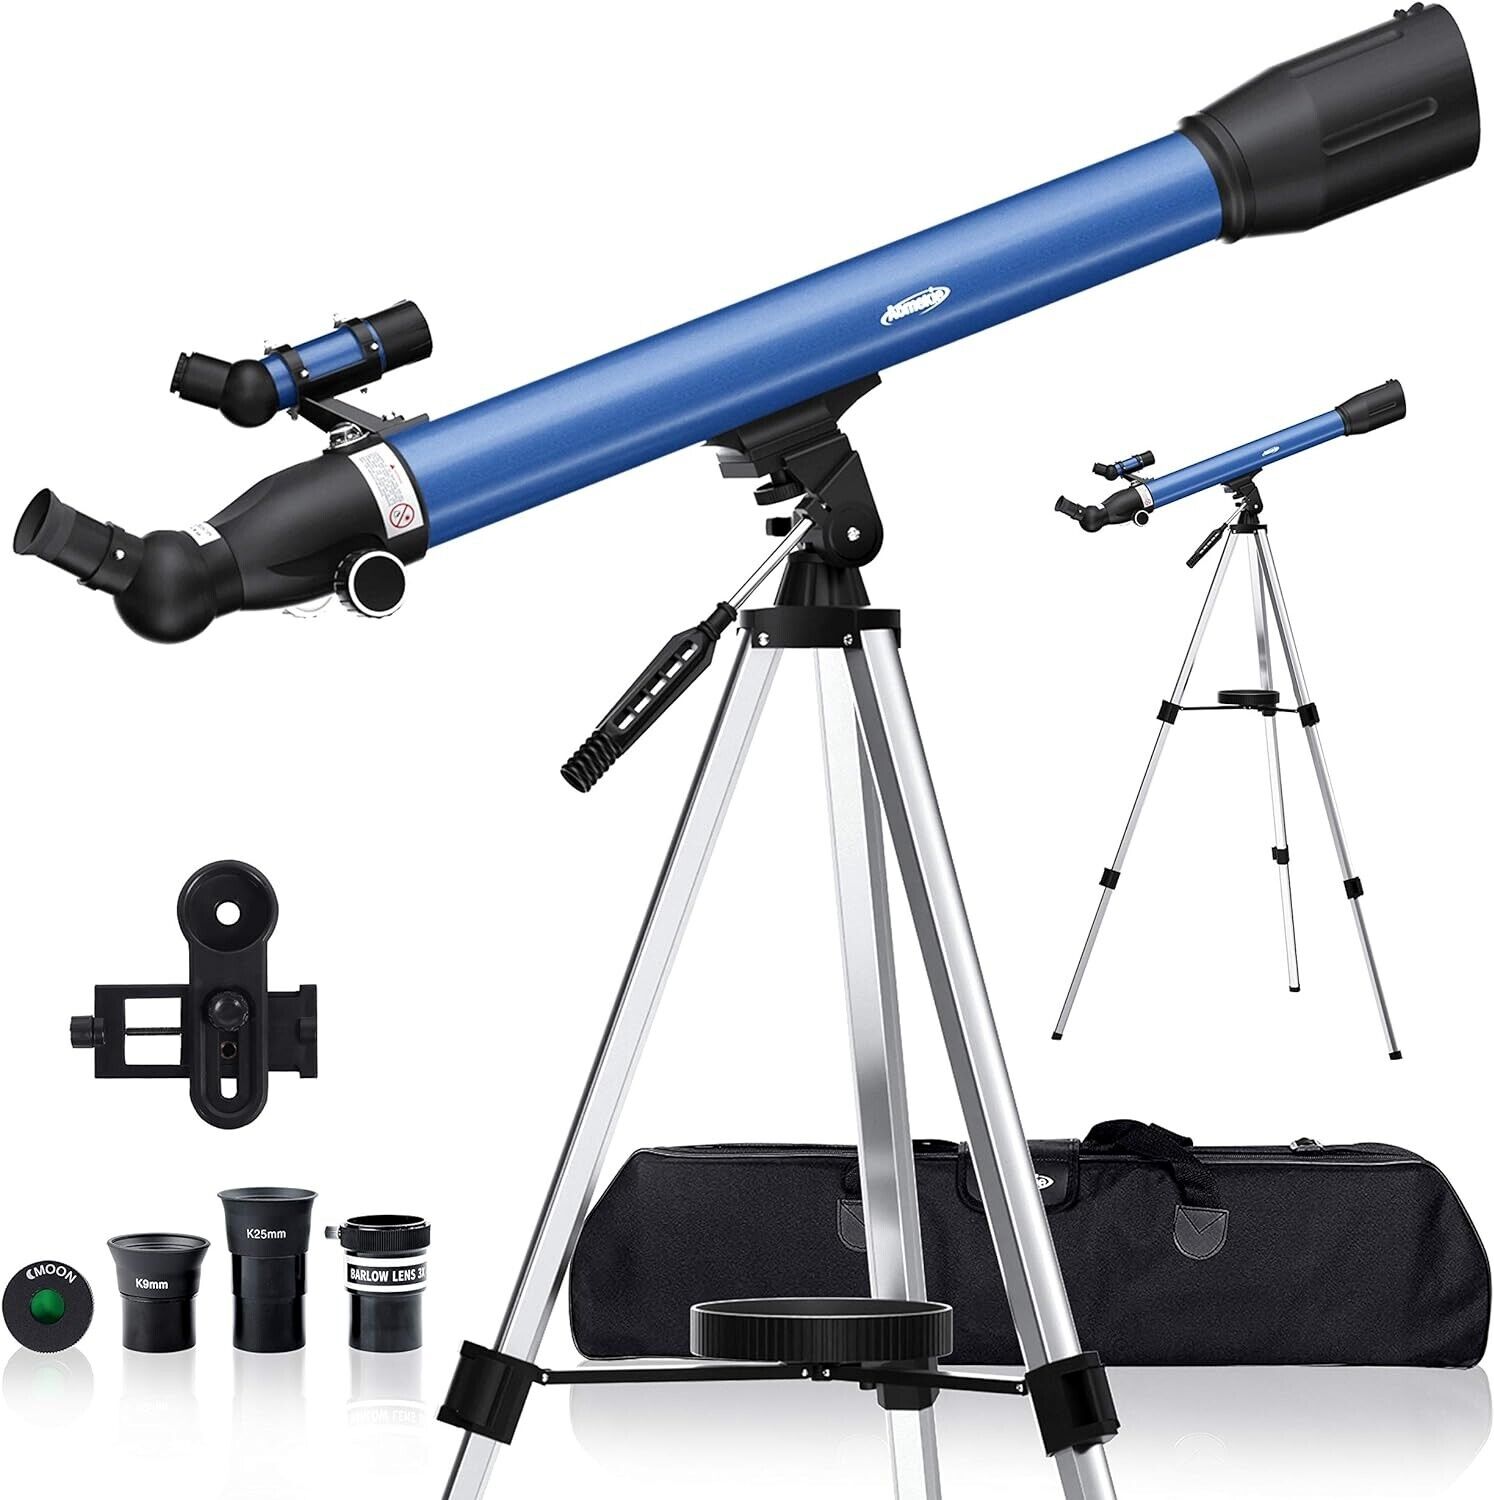 🔭 234X 60MMx700MM STAINLESS STEEL ADJUSTABLE Telescope ALL-IN-1 KIT TRIPOD